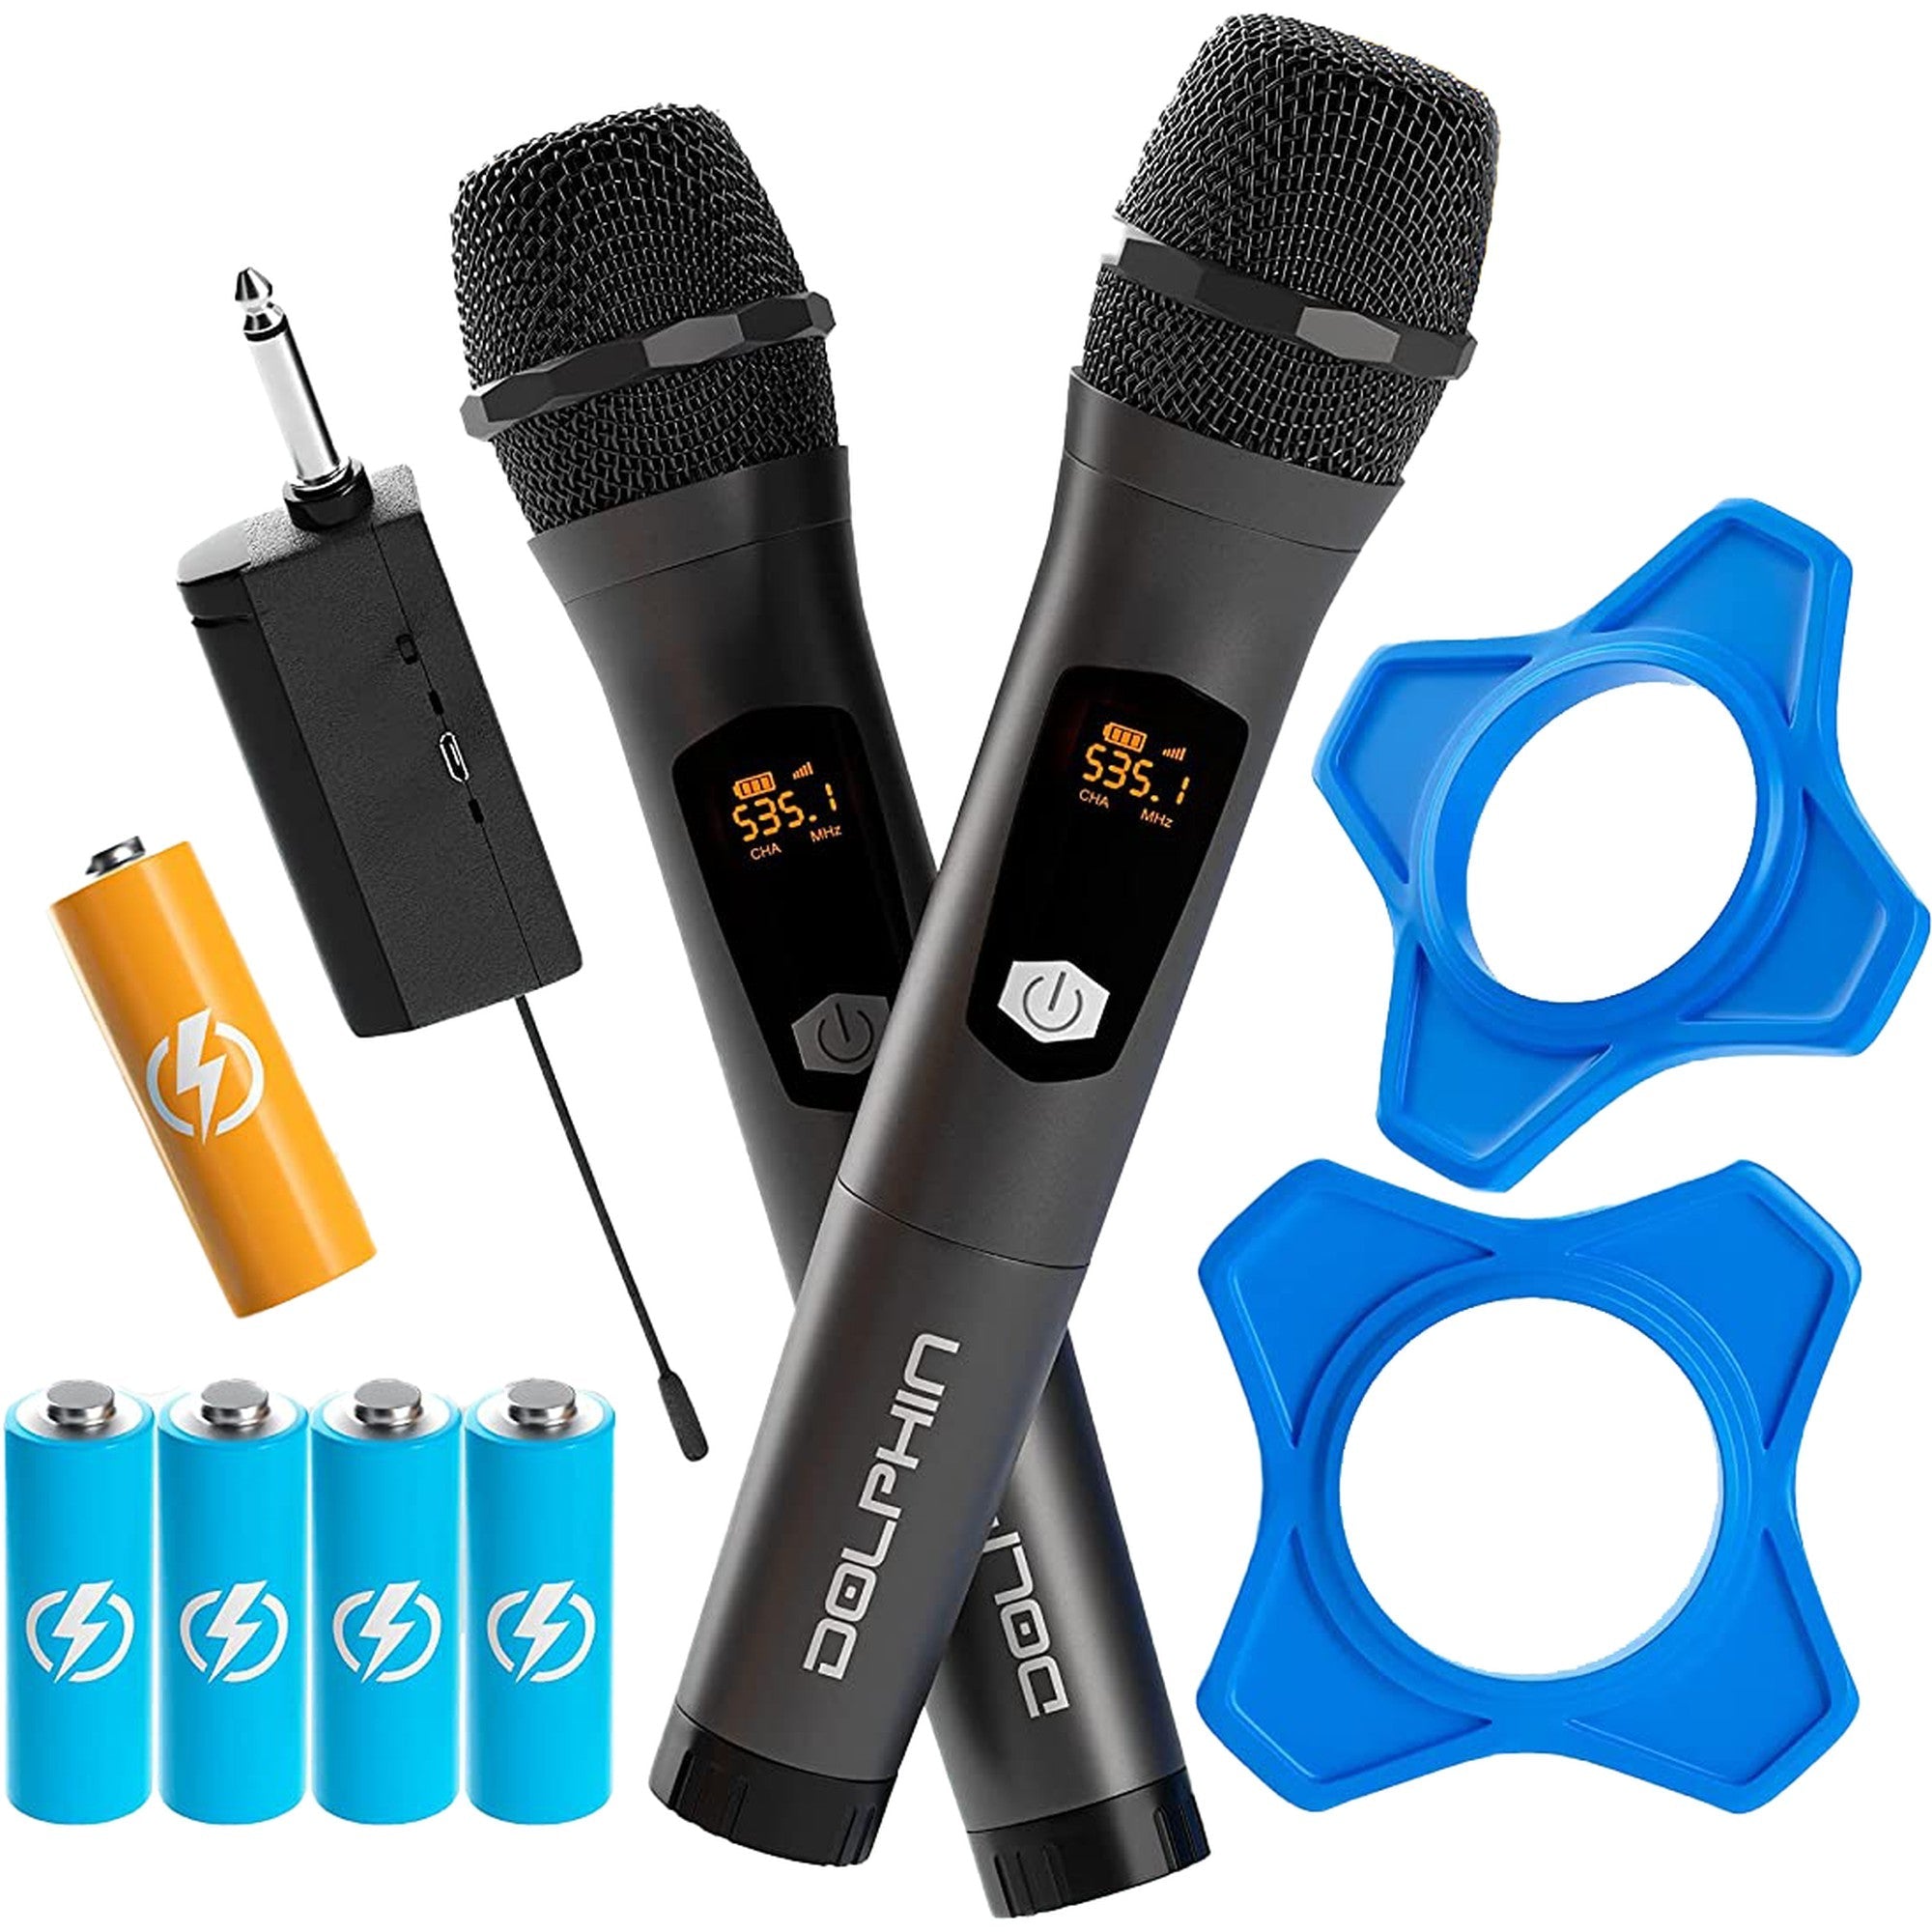 Cordless　of　Set　Top　Dual　Wireless　Handheld　Microphone　Dolphin　MCX20　Receiver　2)　Mic　with　System,　(Set　Electros　Dynamic　Rechargeable